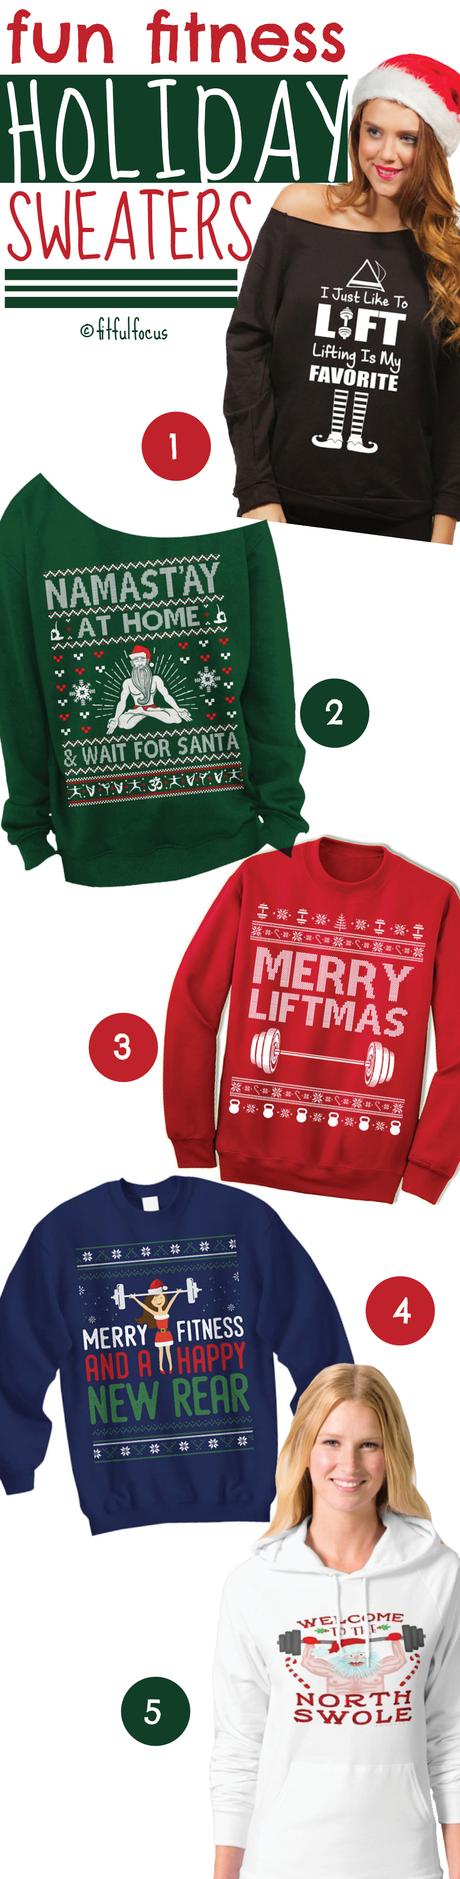 Fun Fitness Holiday Sweaters